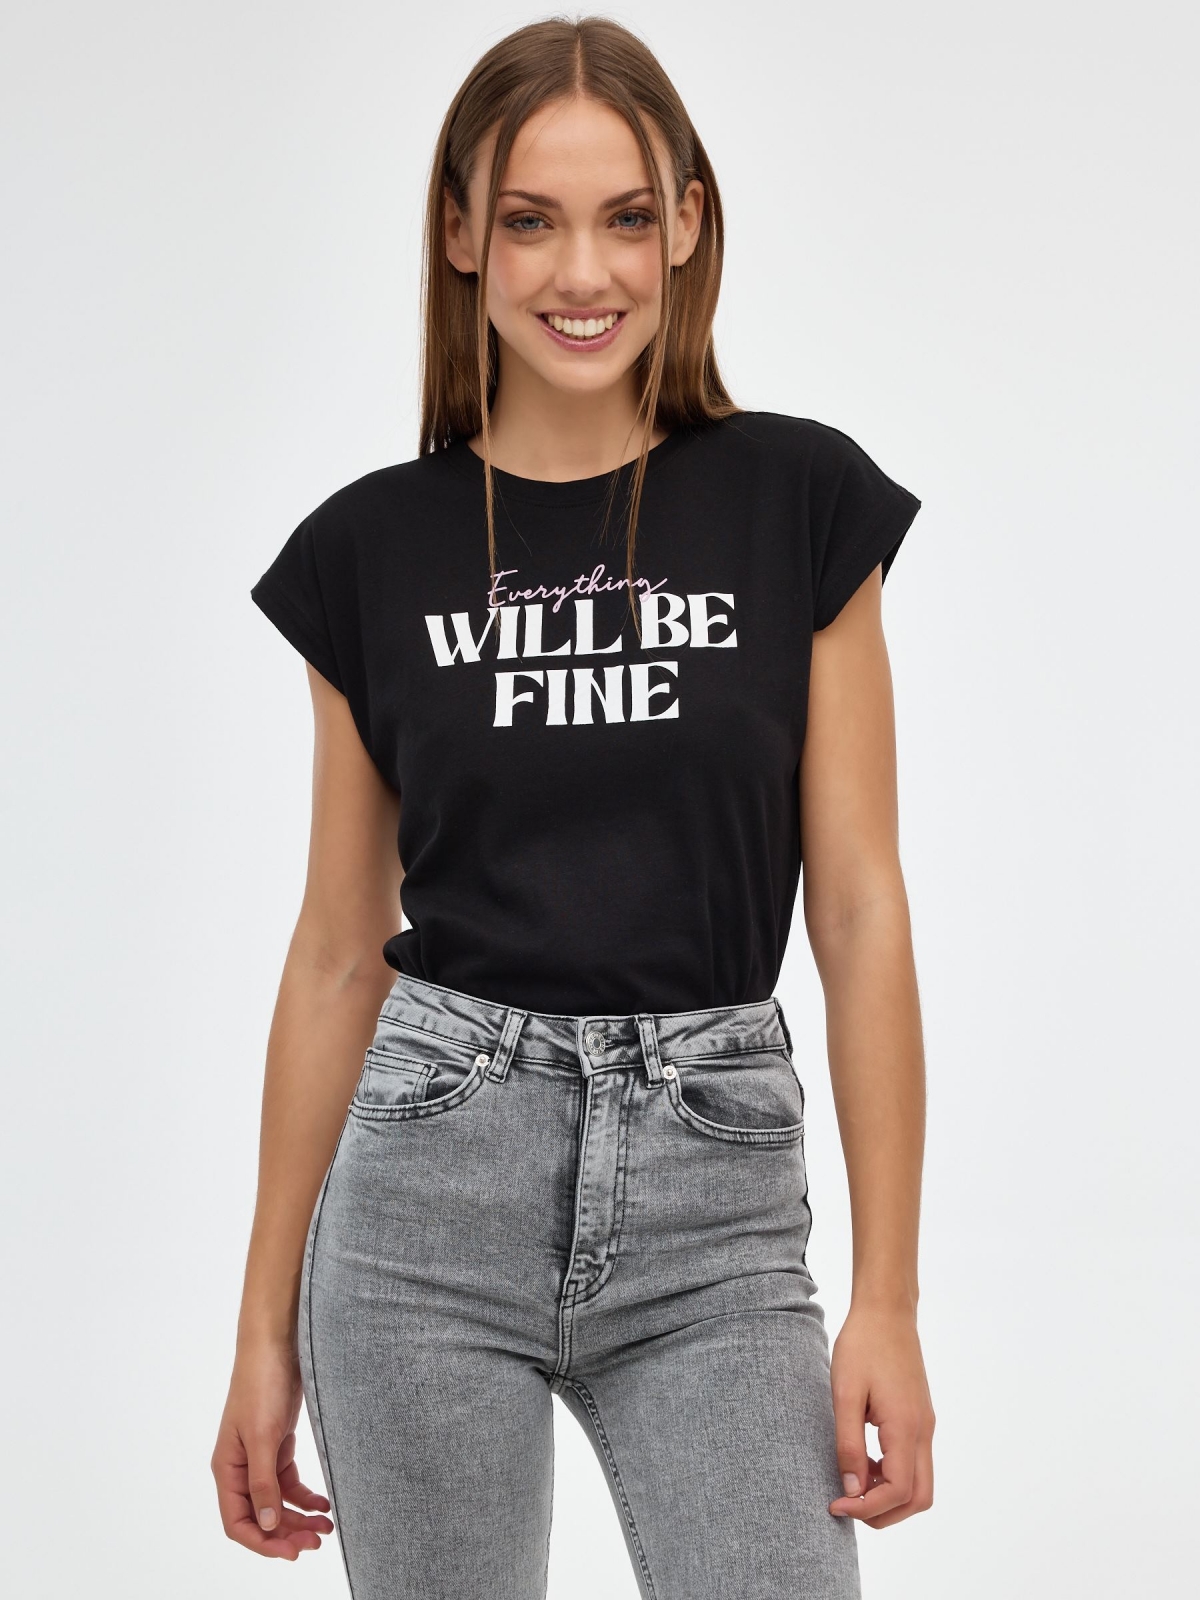 Will Be Fine T-shirt black middle front view